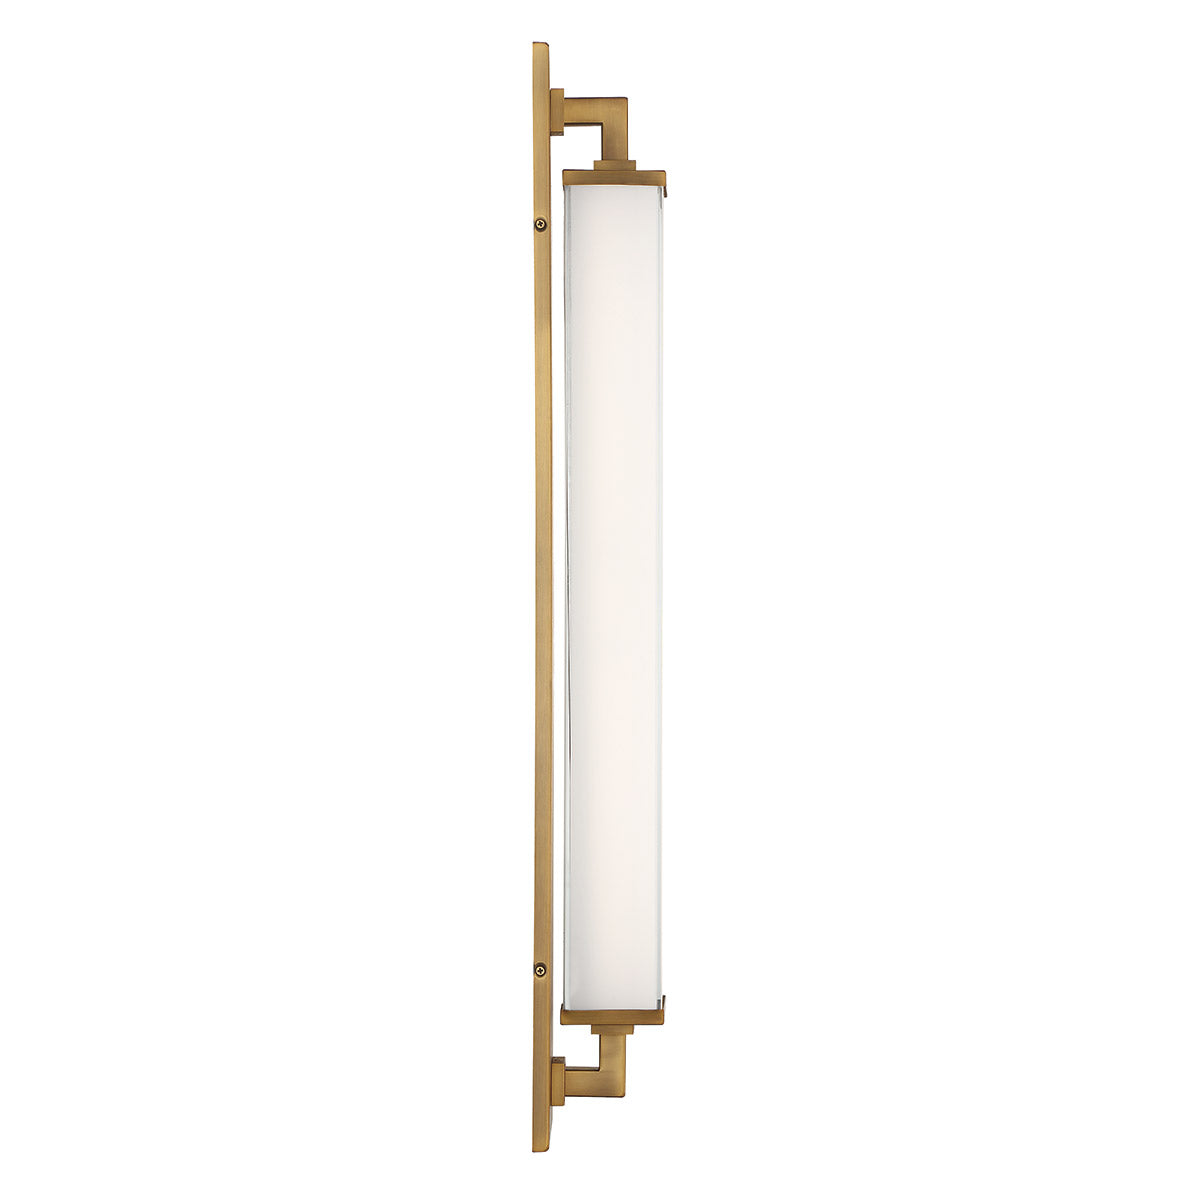 Gatsby 32" LED Wall Sconce